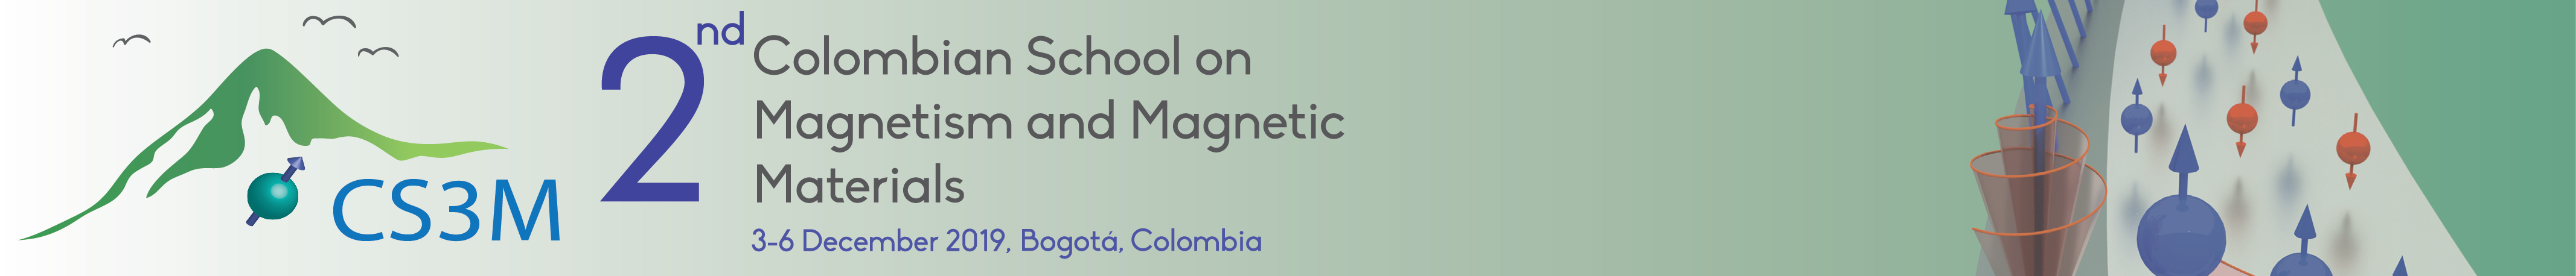 CS3M - Colombian School on Magnetism and Magnetic Materials